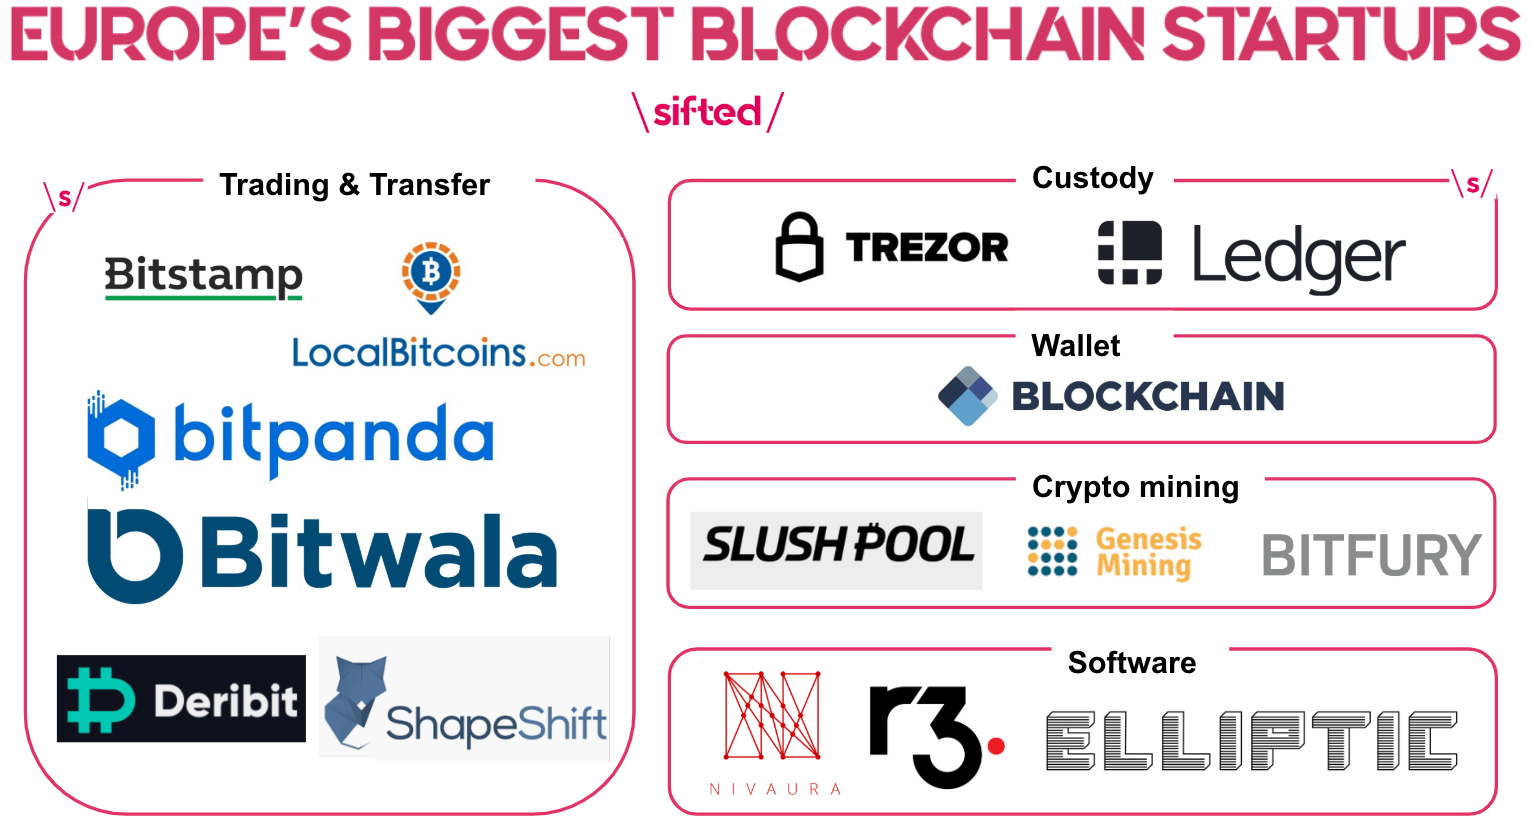 The European blockchain ecosystem outlined